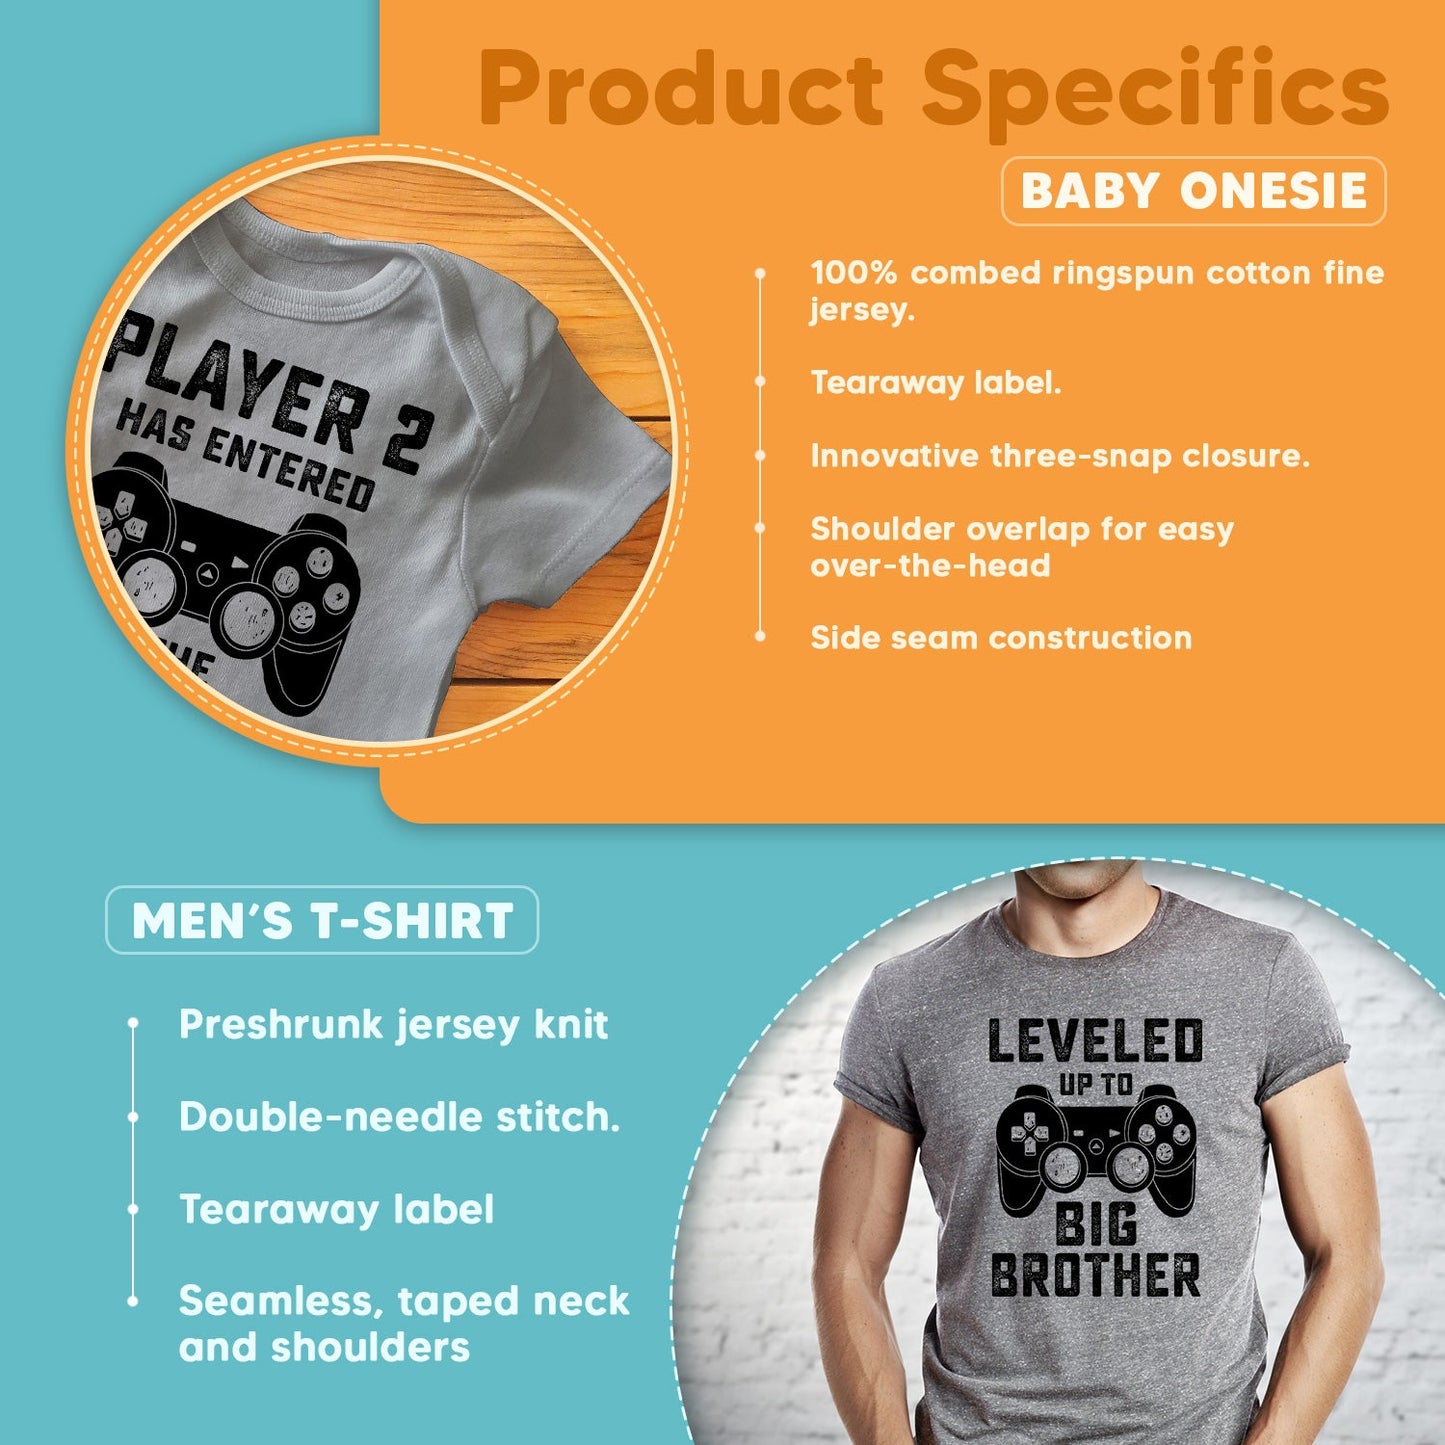 Happy First Fathers Day Outfit Father Son Funny Gamer Matching Outfit